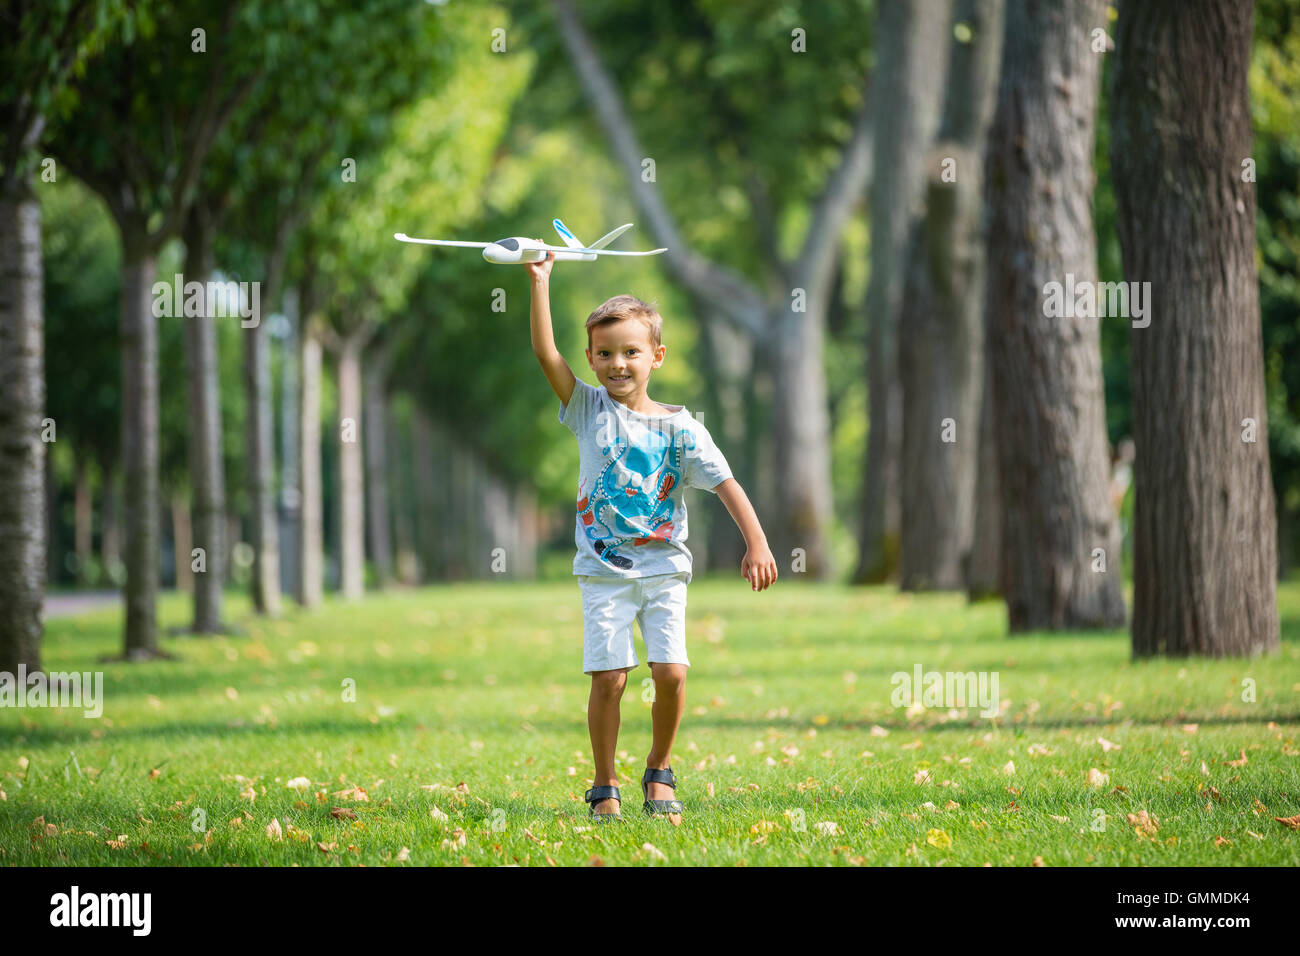 Boy playing with toy glider in park on summer day Stock Photo